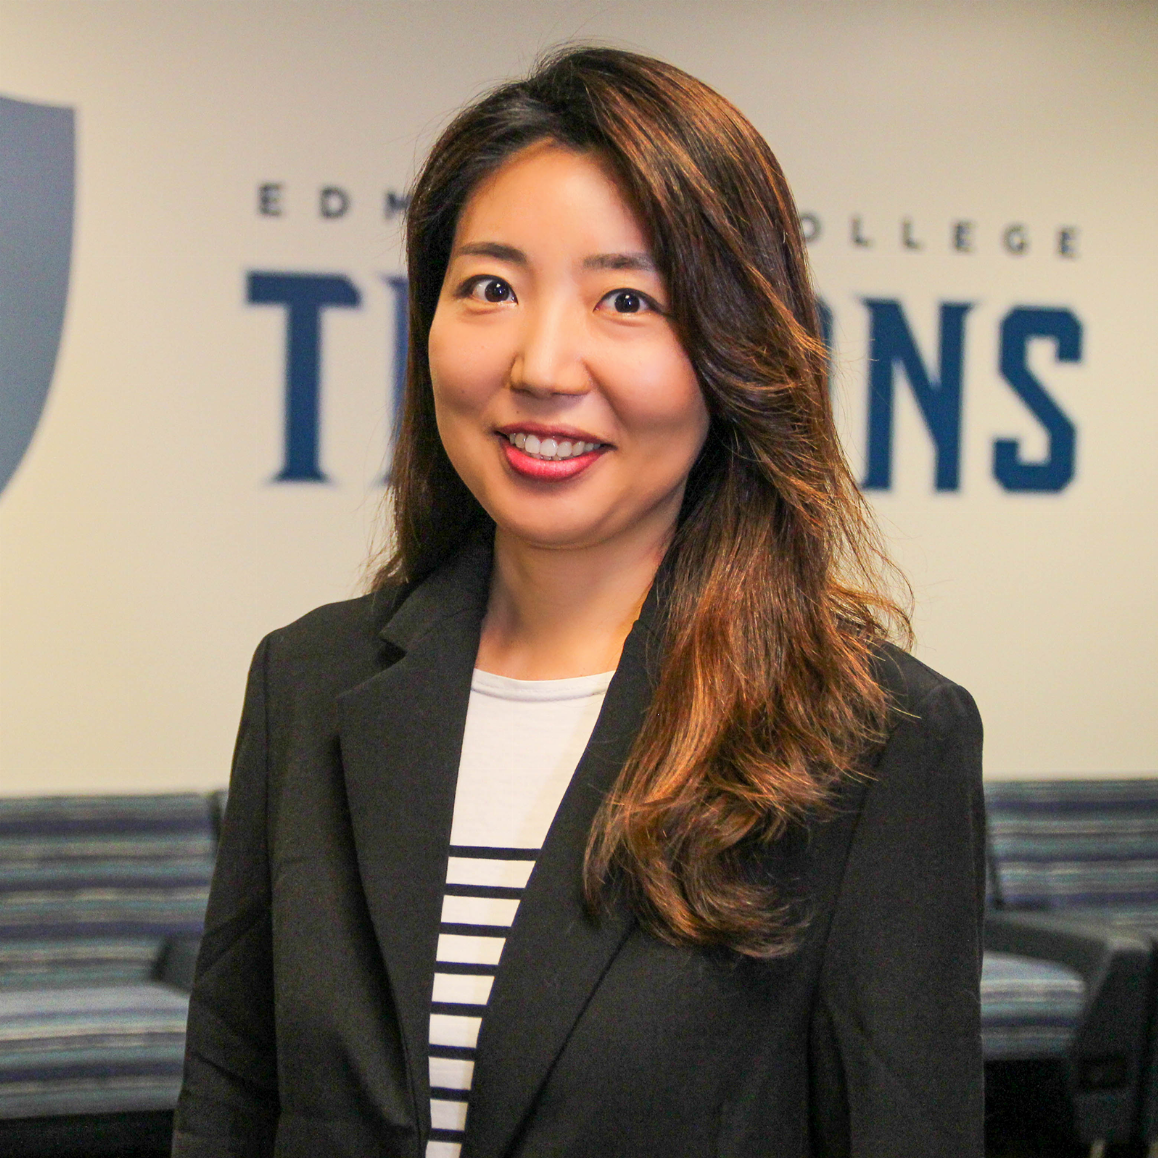 Shinhae Hwang will serve as the Edmonds College Student Trustee from July 1 to June 2023.